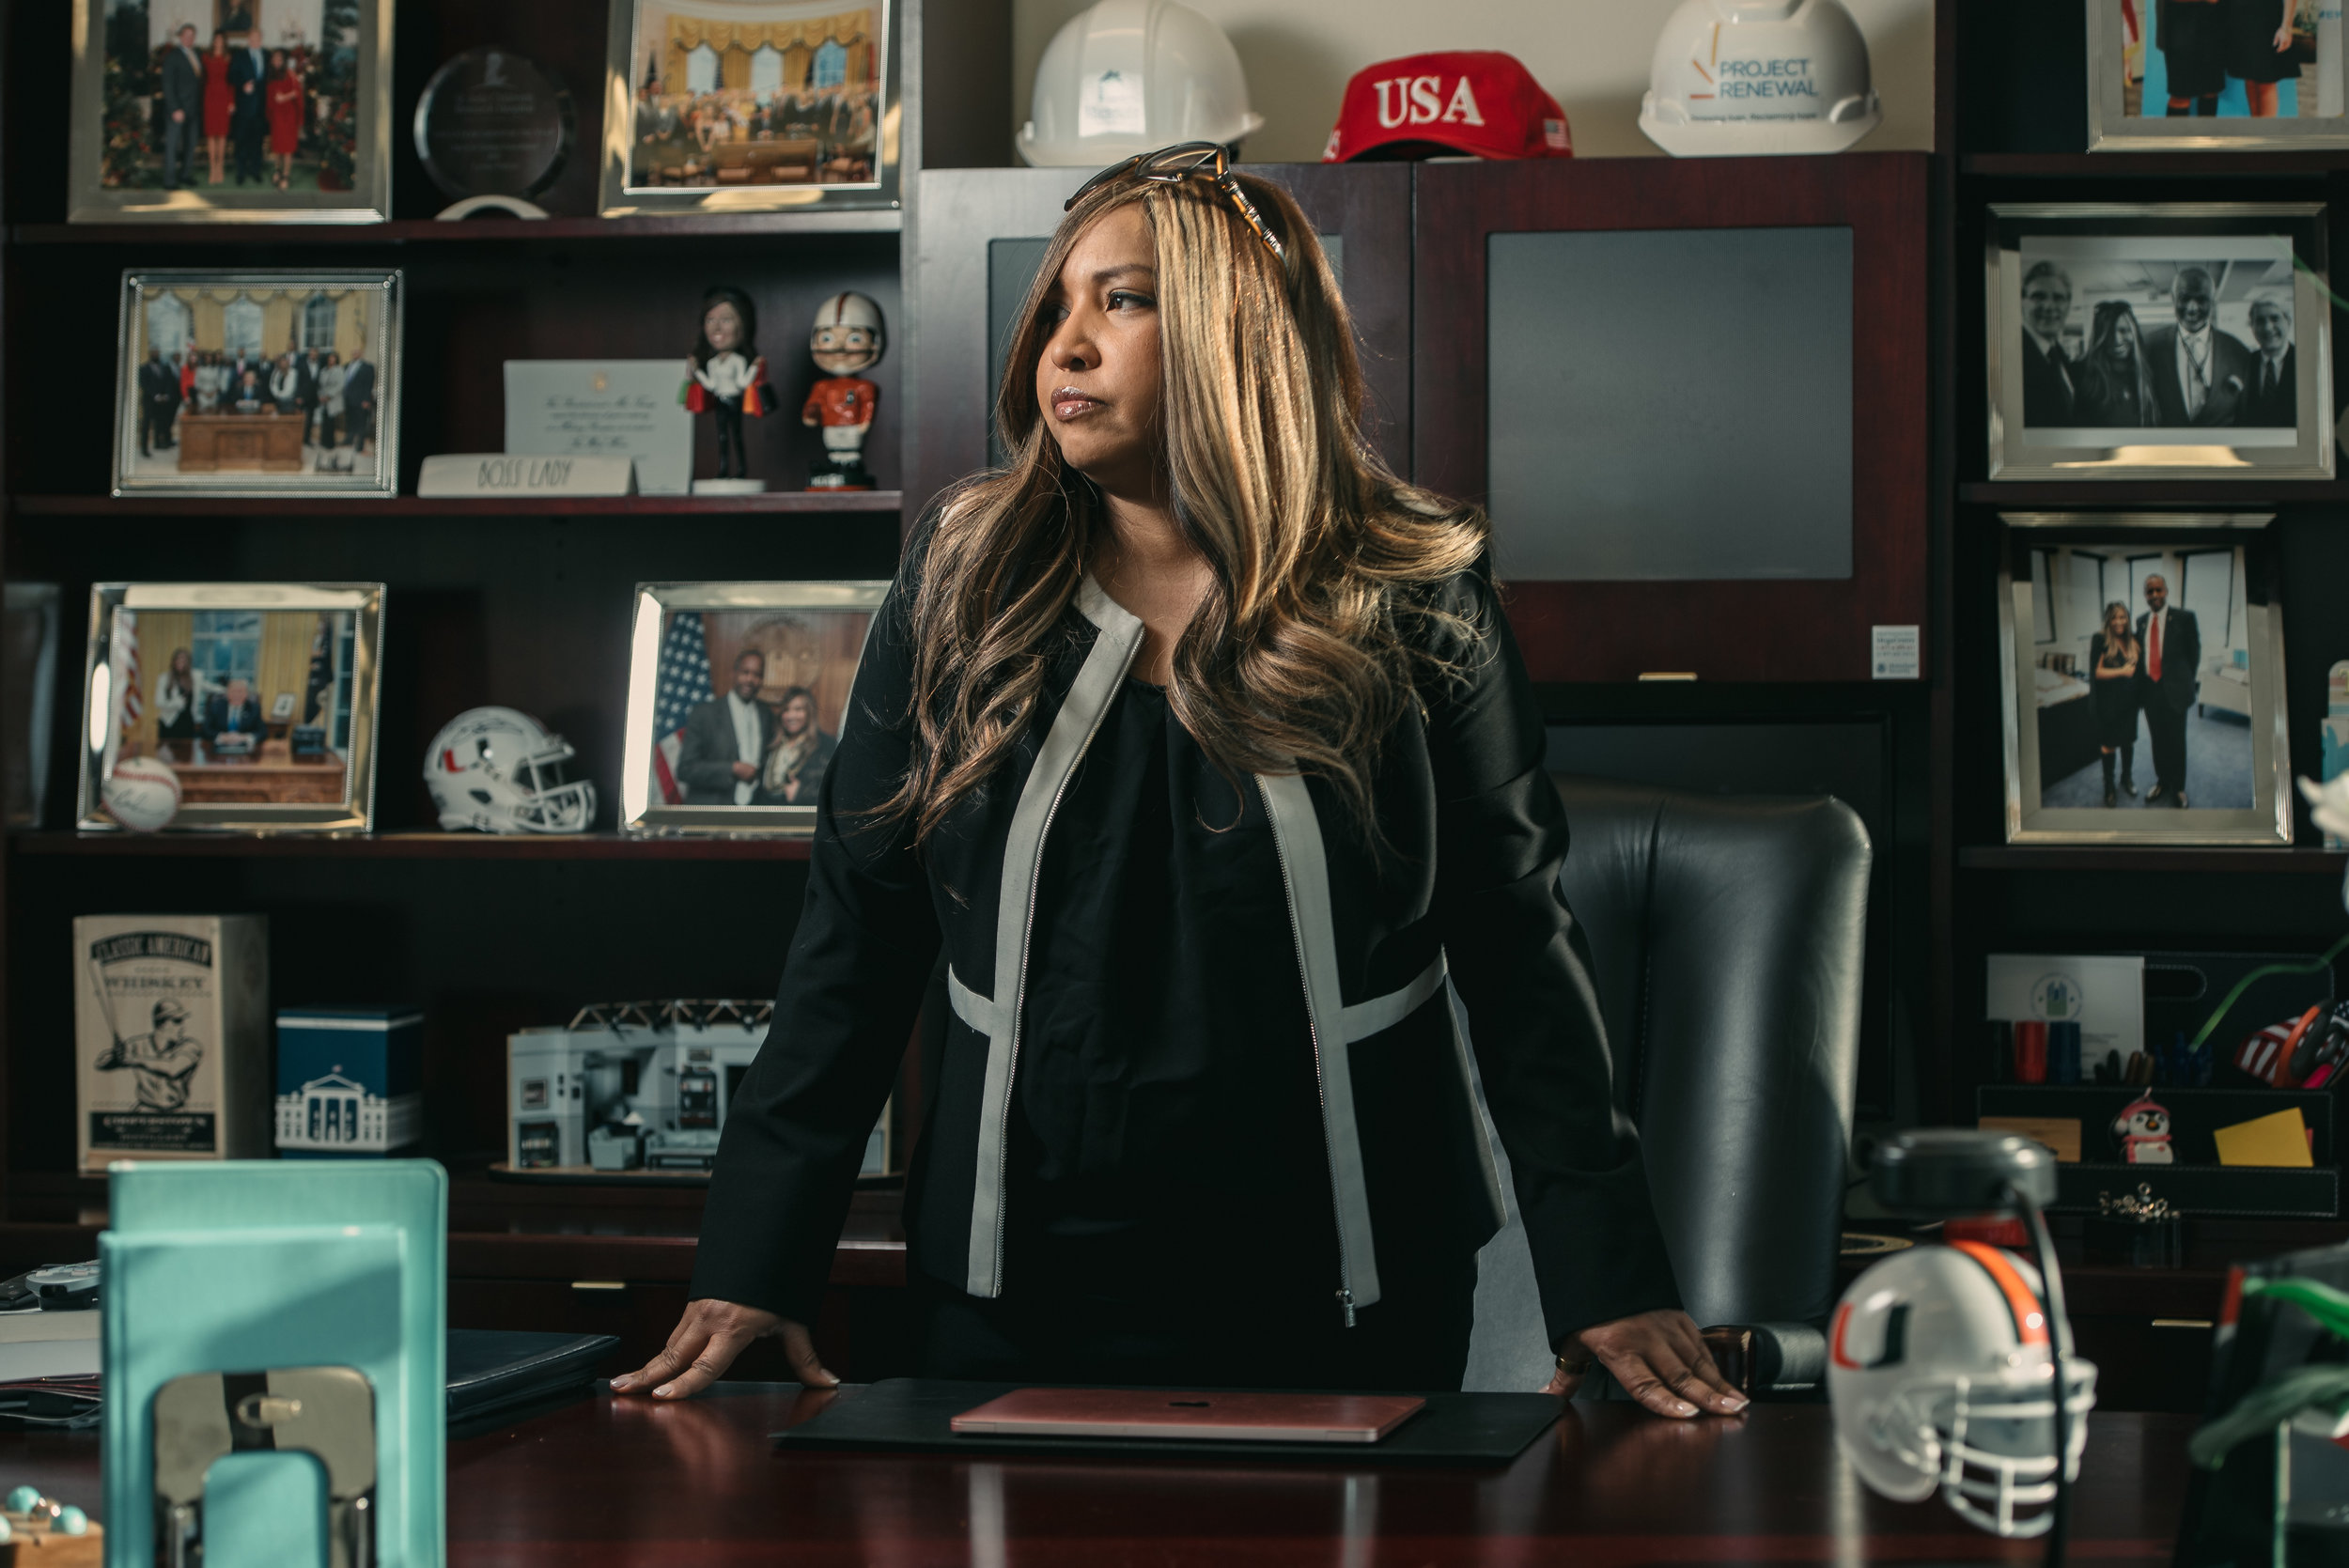  Lynne Patton, Trump appointee to the U.S. Department of Housing and Urban Development’s regional administrator for New York and New Jersey, in her office at 26 Federal Plaza in Lower Manhattan, March 2019. 